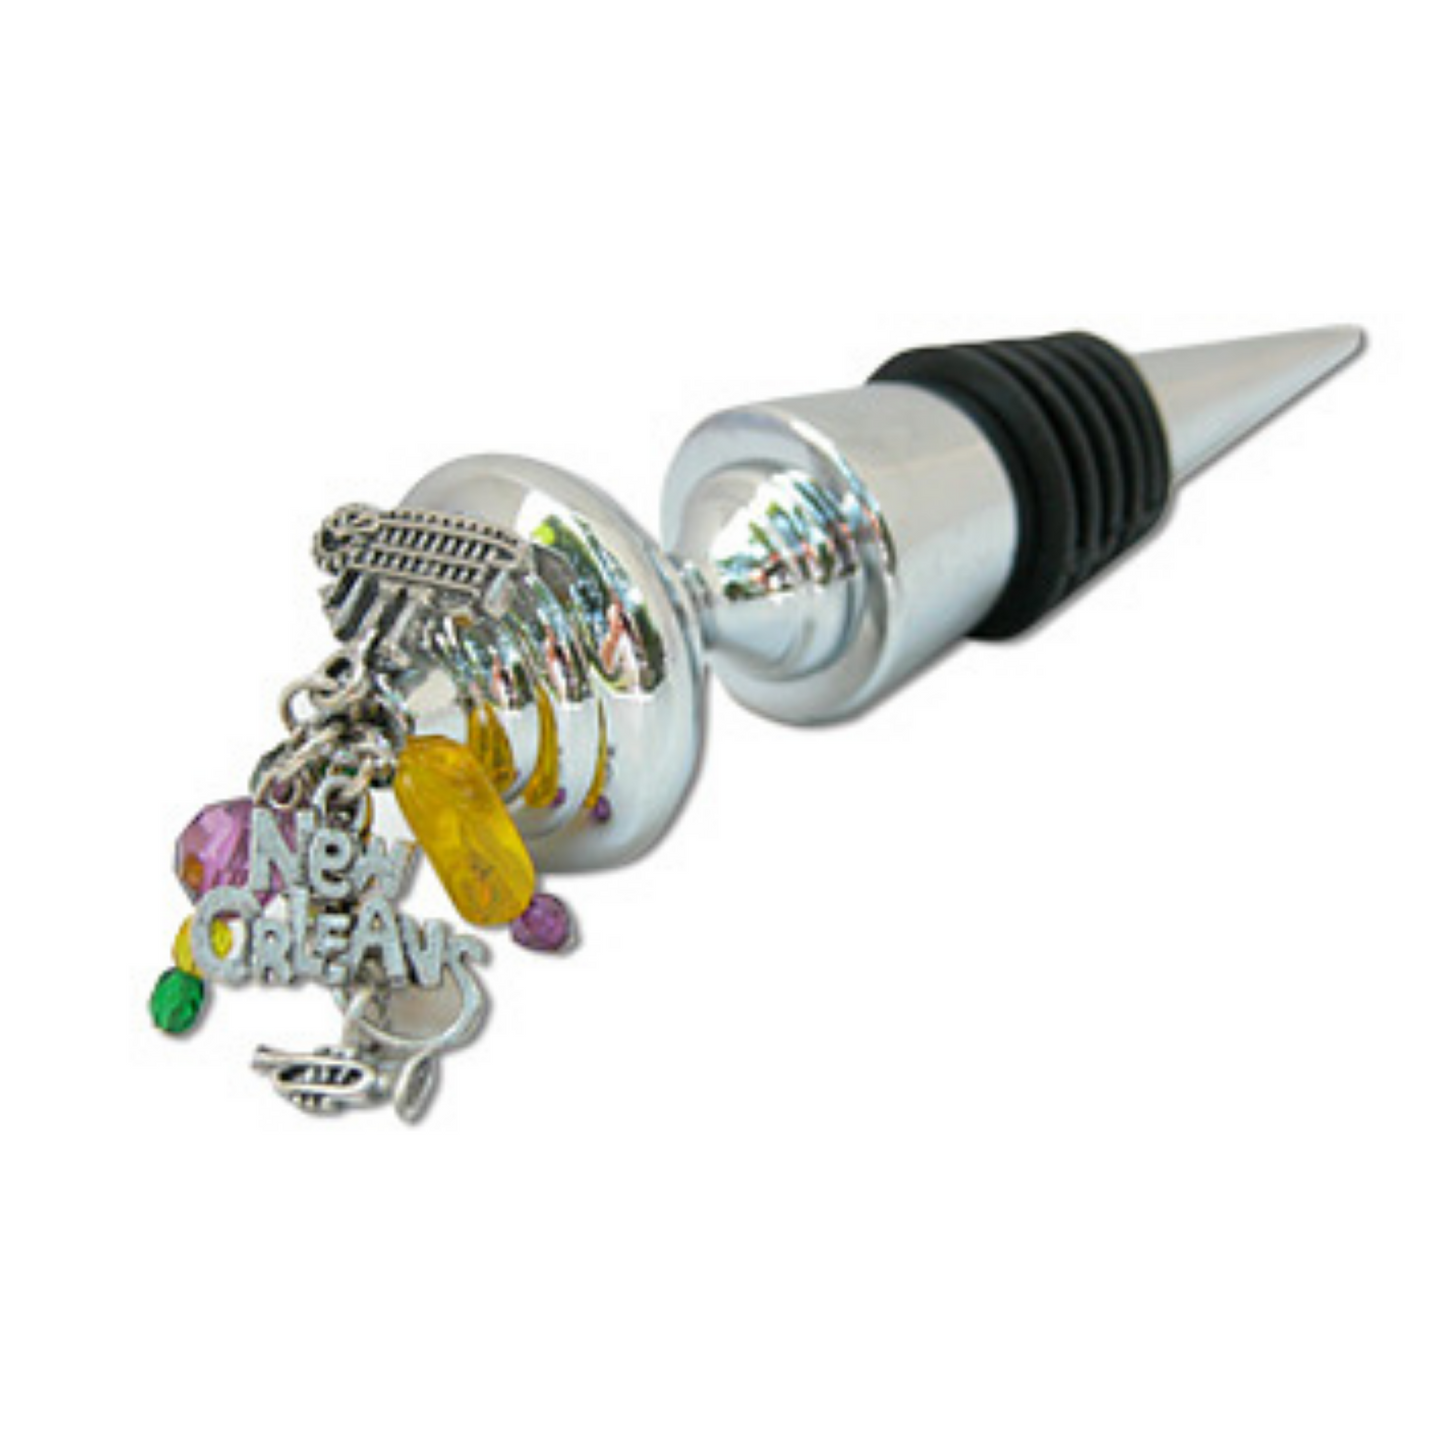 New Orleans bottle stopper | New Orleans theme charms